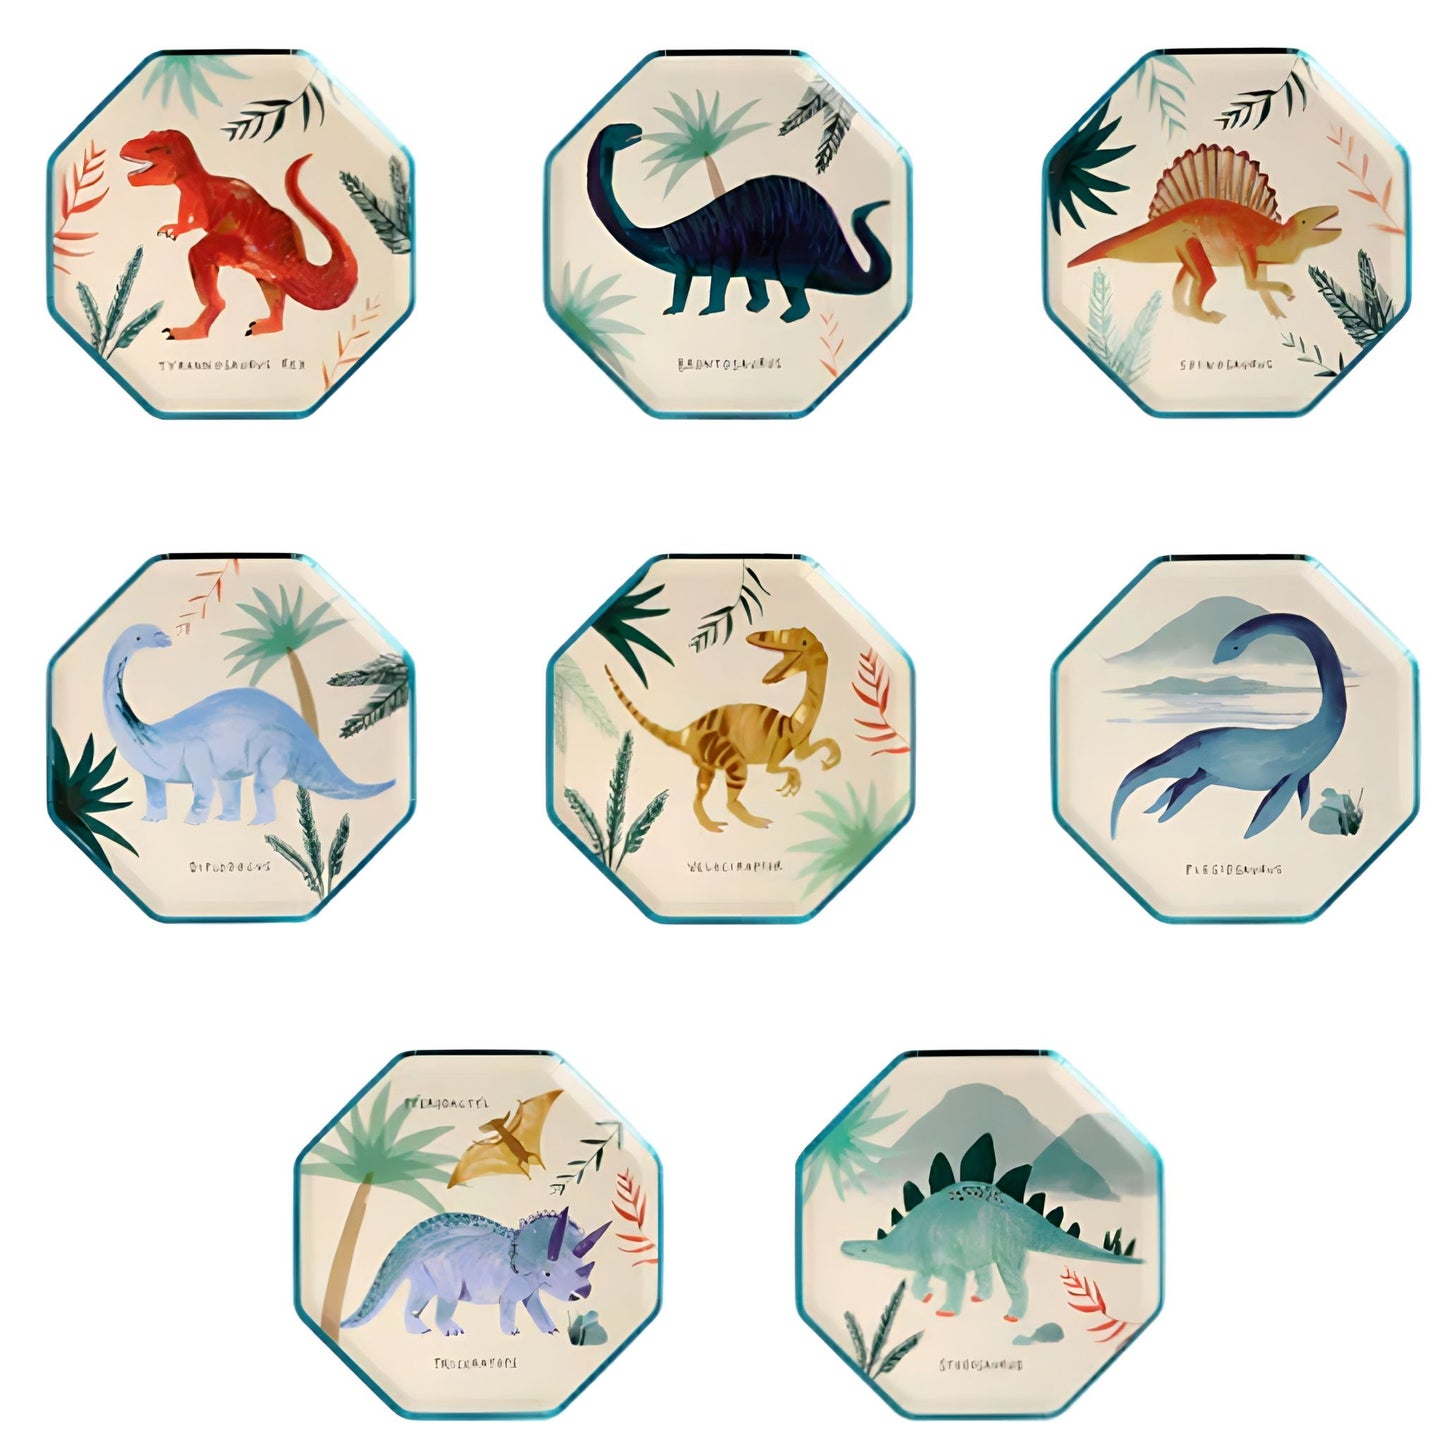 8 plates with different dinosaur design on each one. Plates in blues, greens, reds and oranges. 21cm